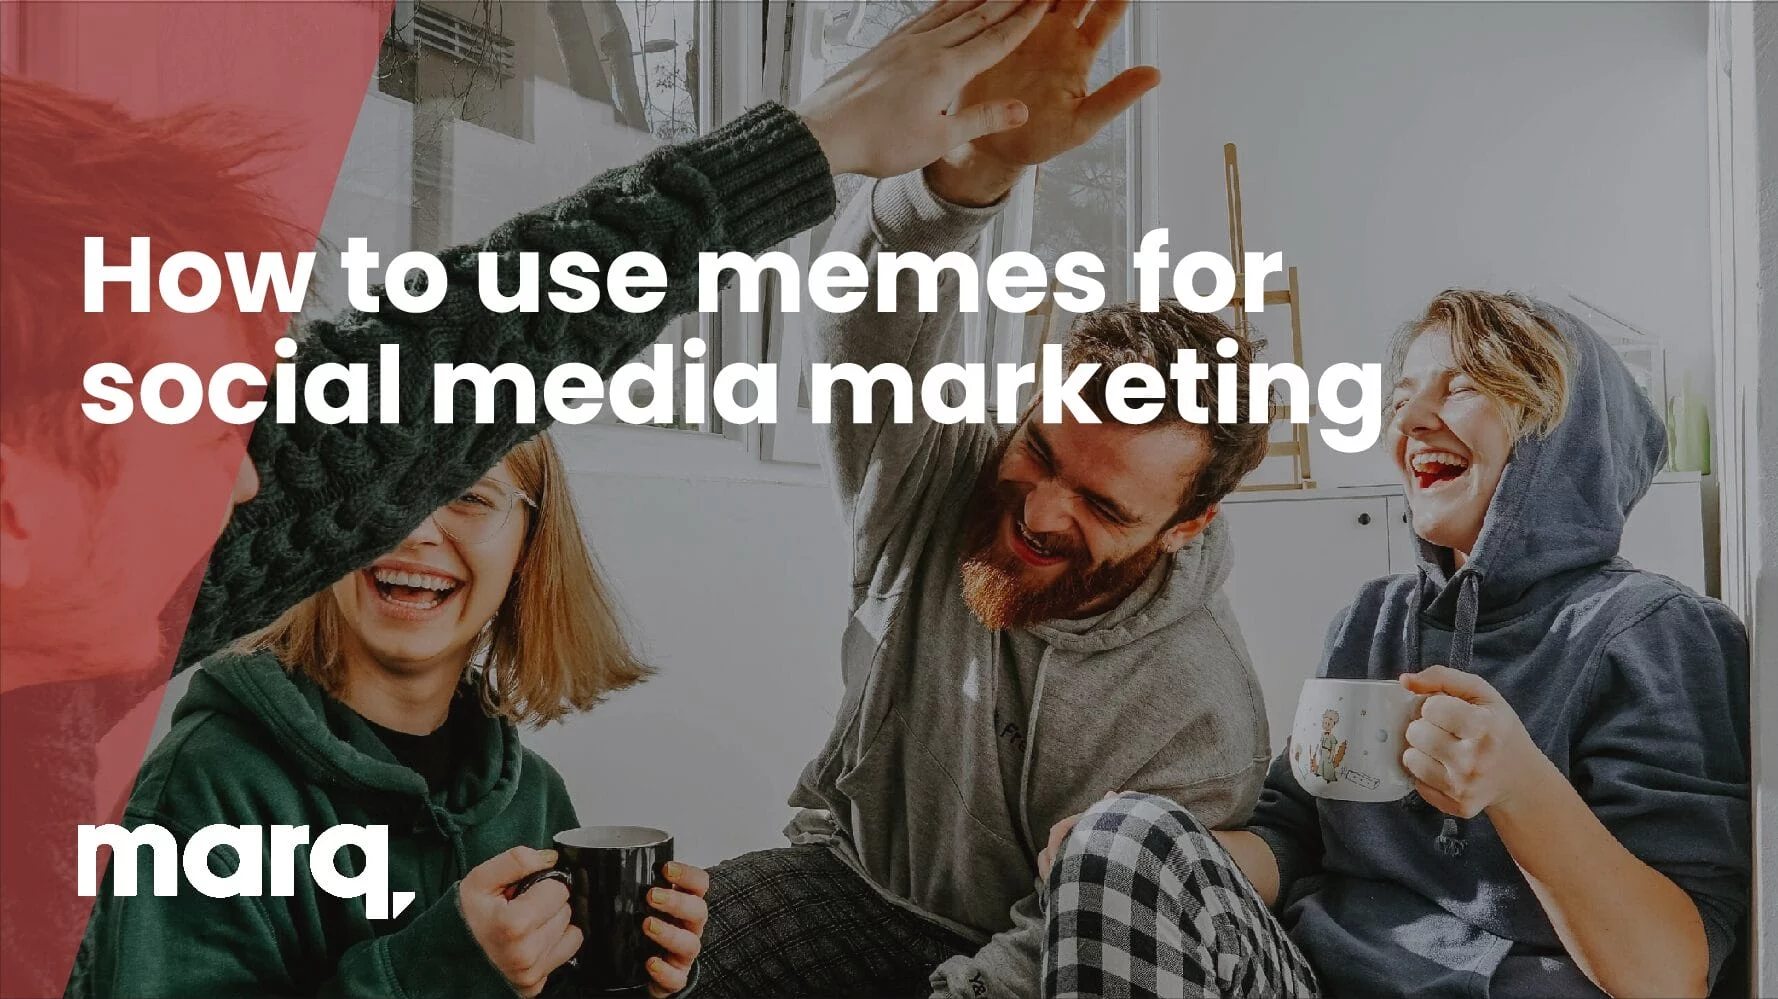 How to use memes for social media marketing